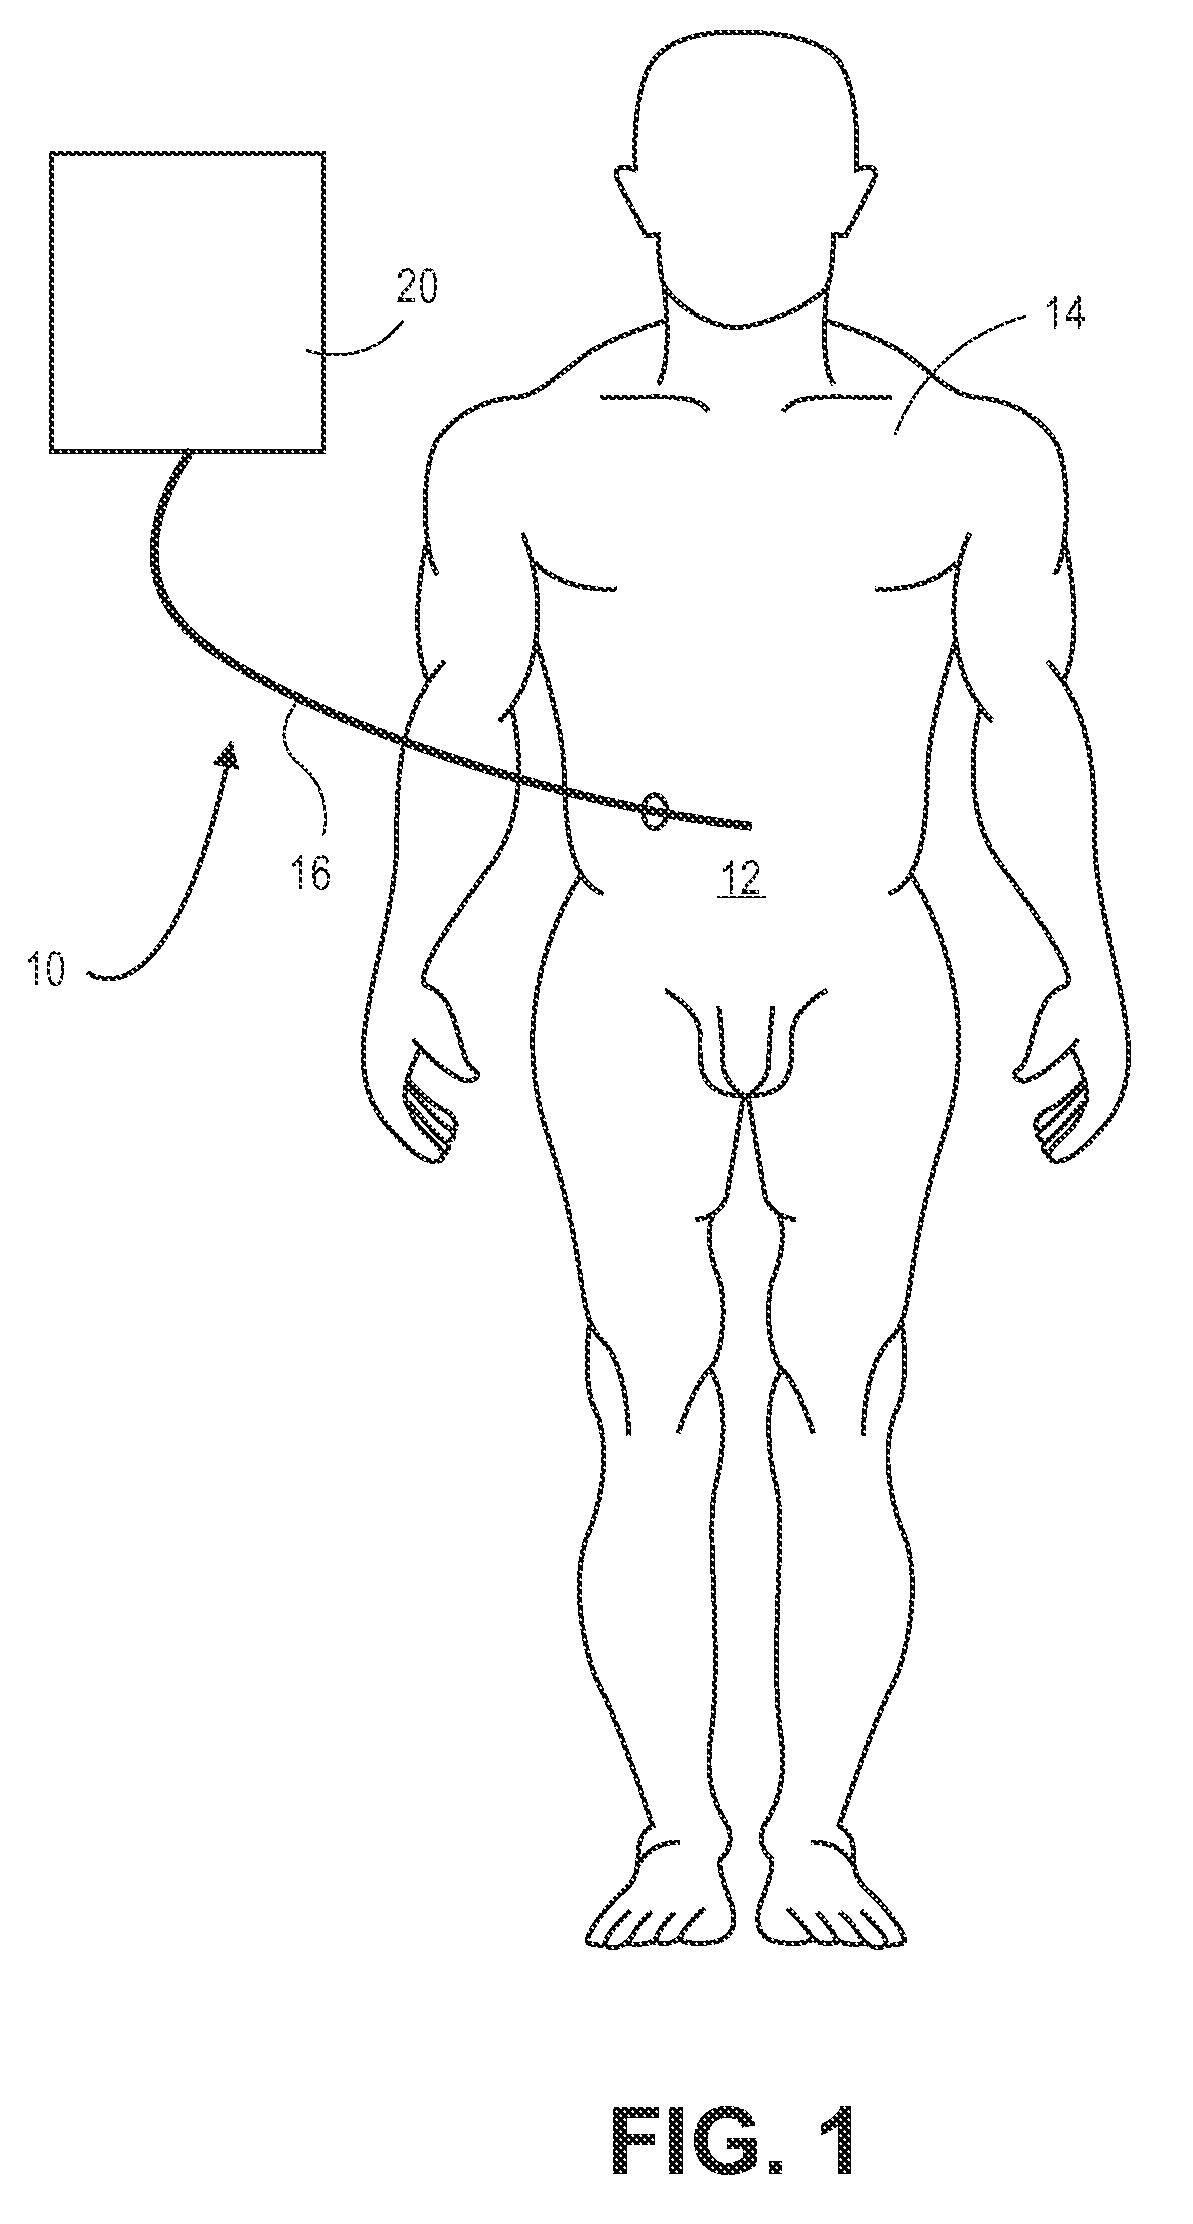 Hypothermia devices and methods